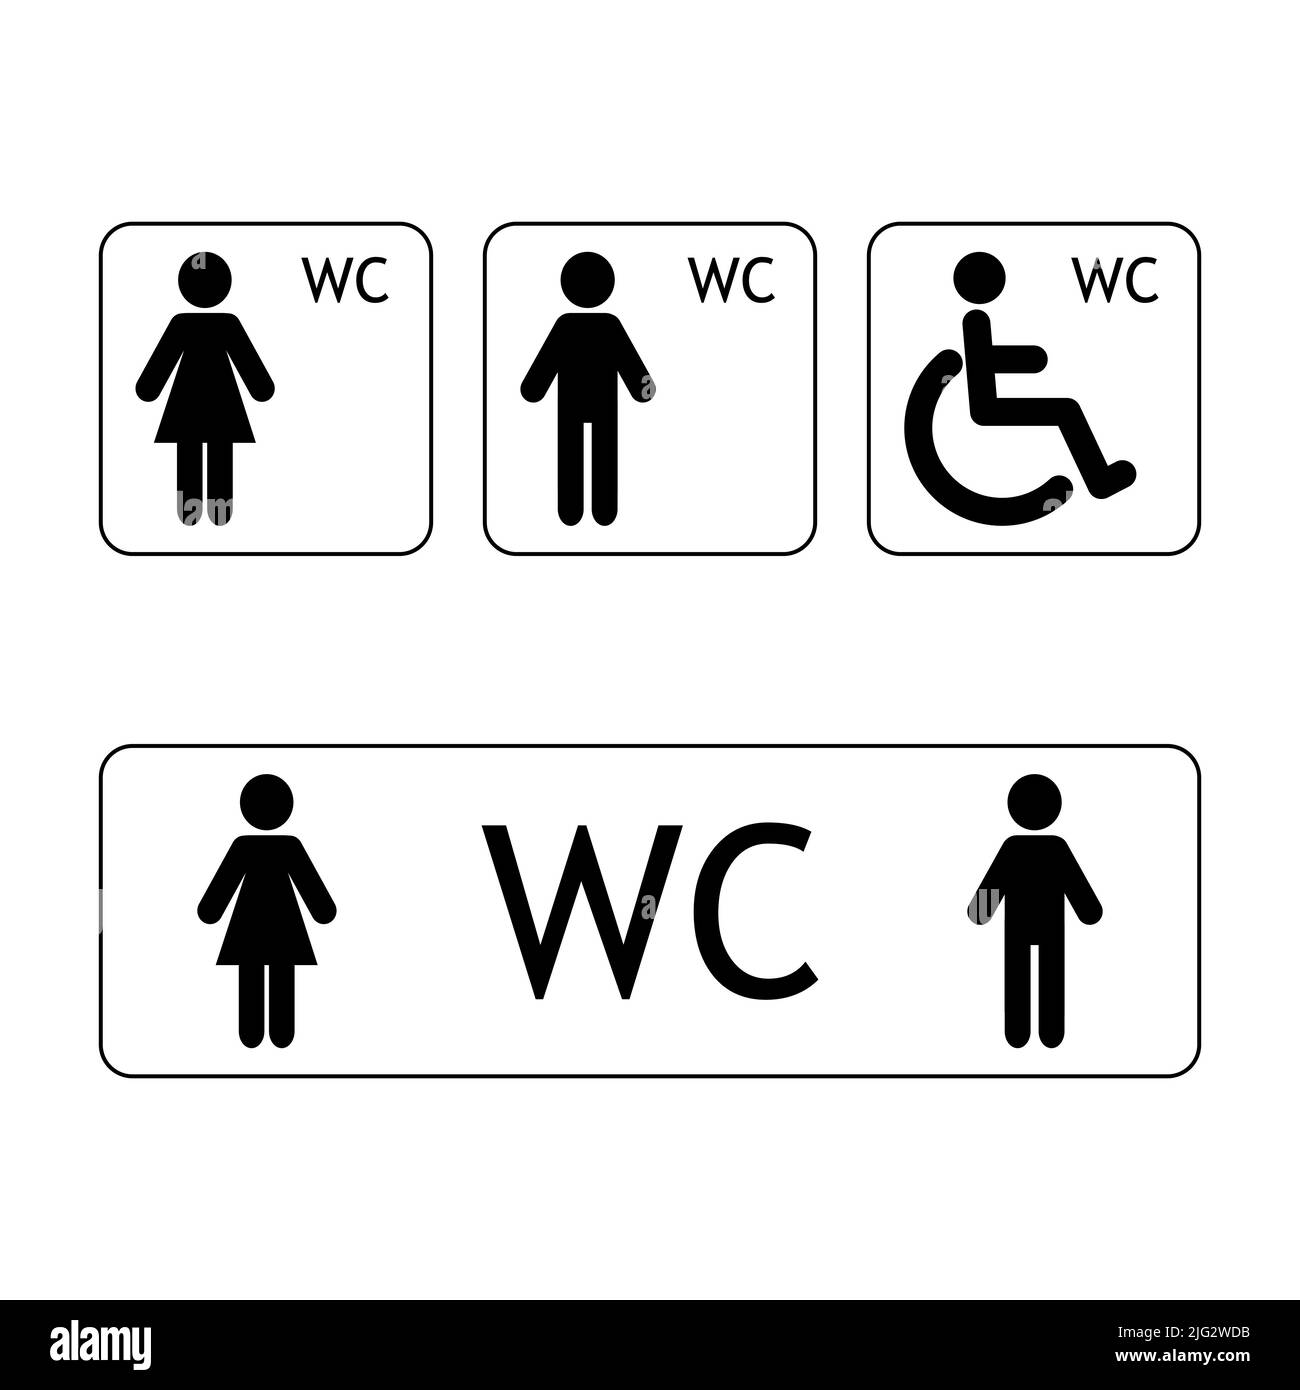 WC sign for restroom. WC toilet sign vector Stock Vector